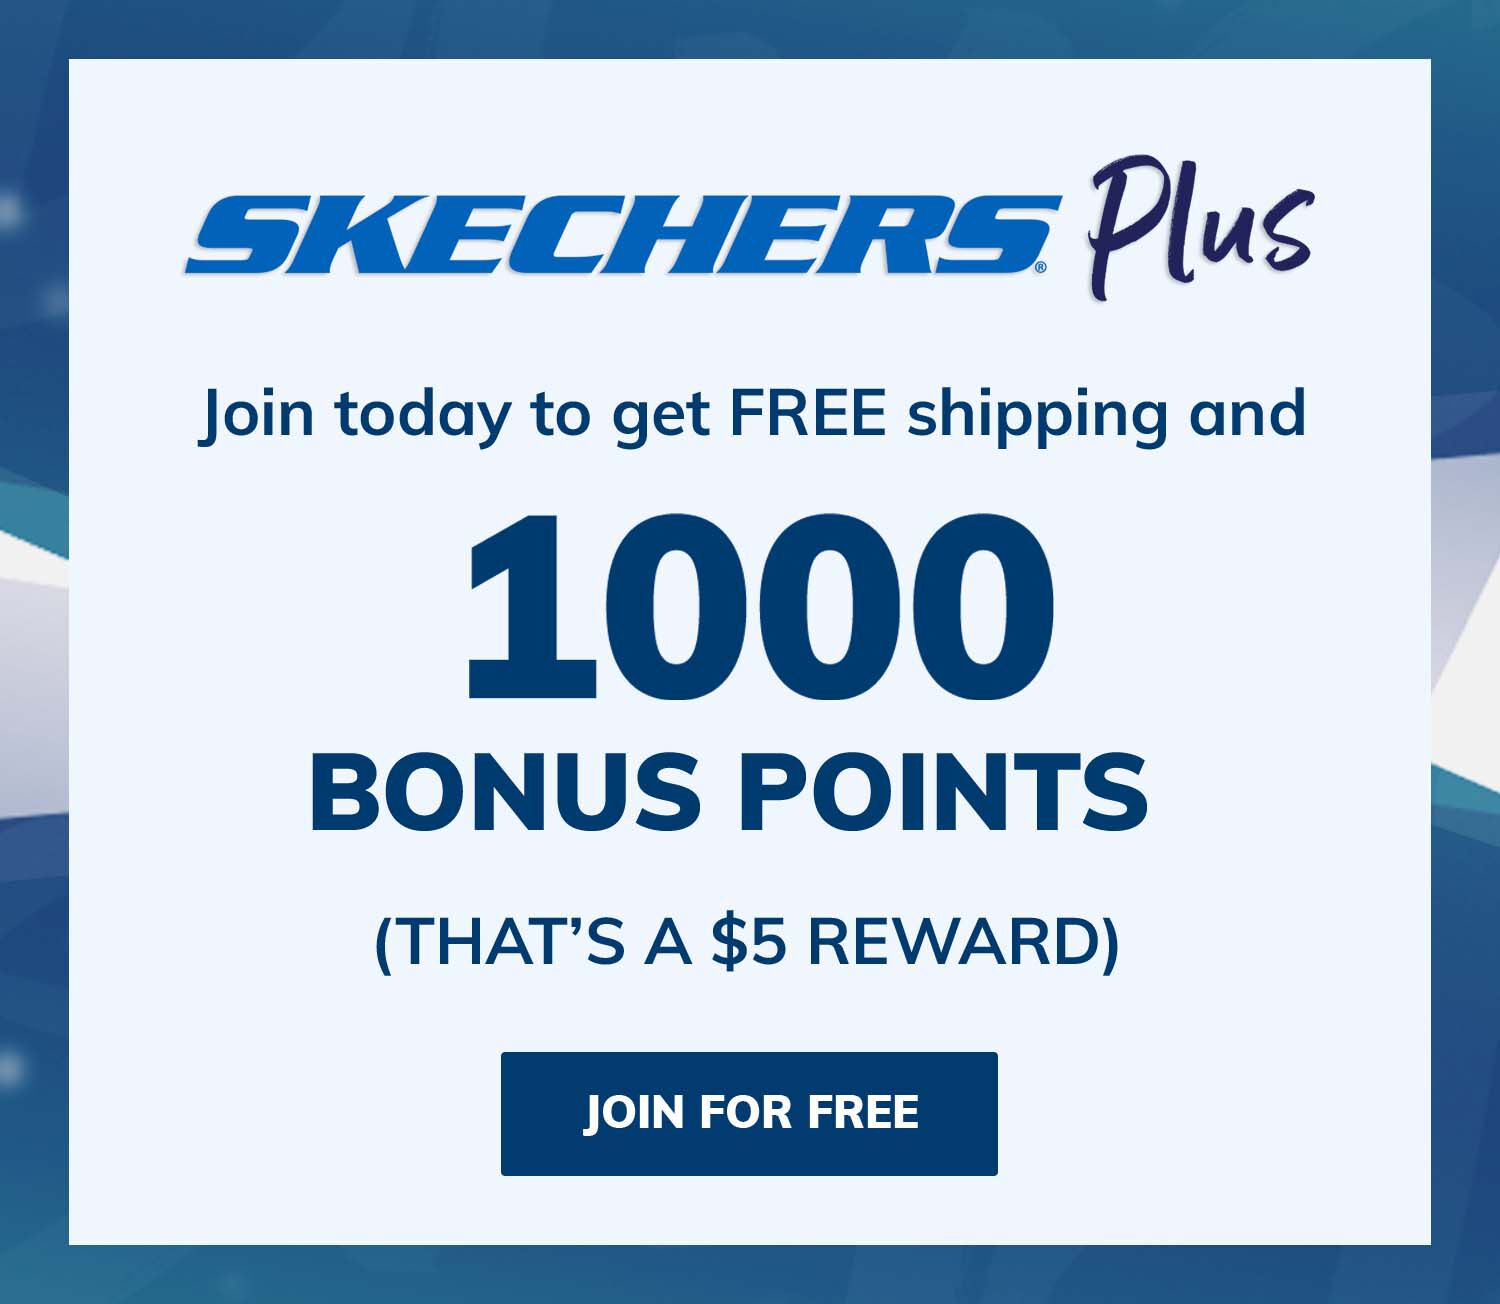 Free Shipping and 1000 Bonus Points